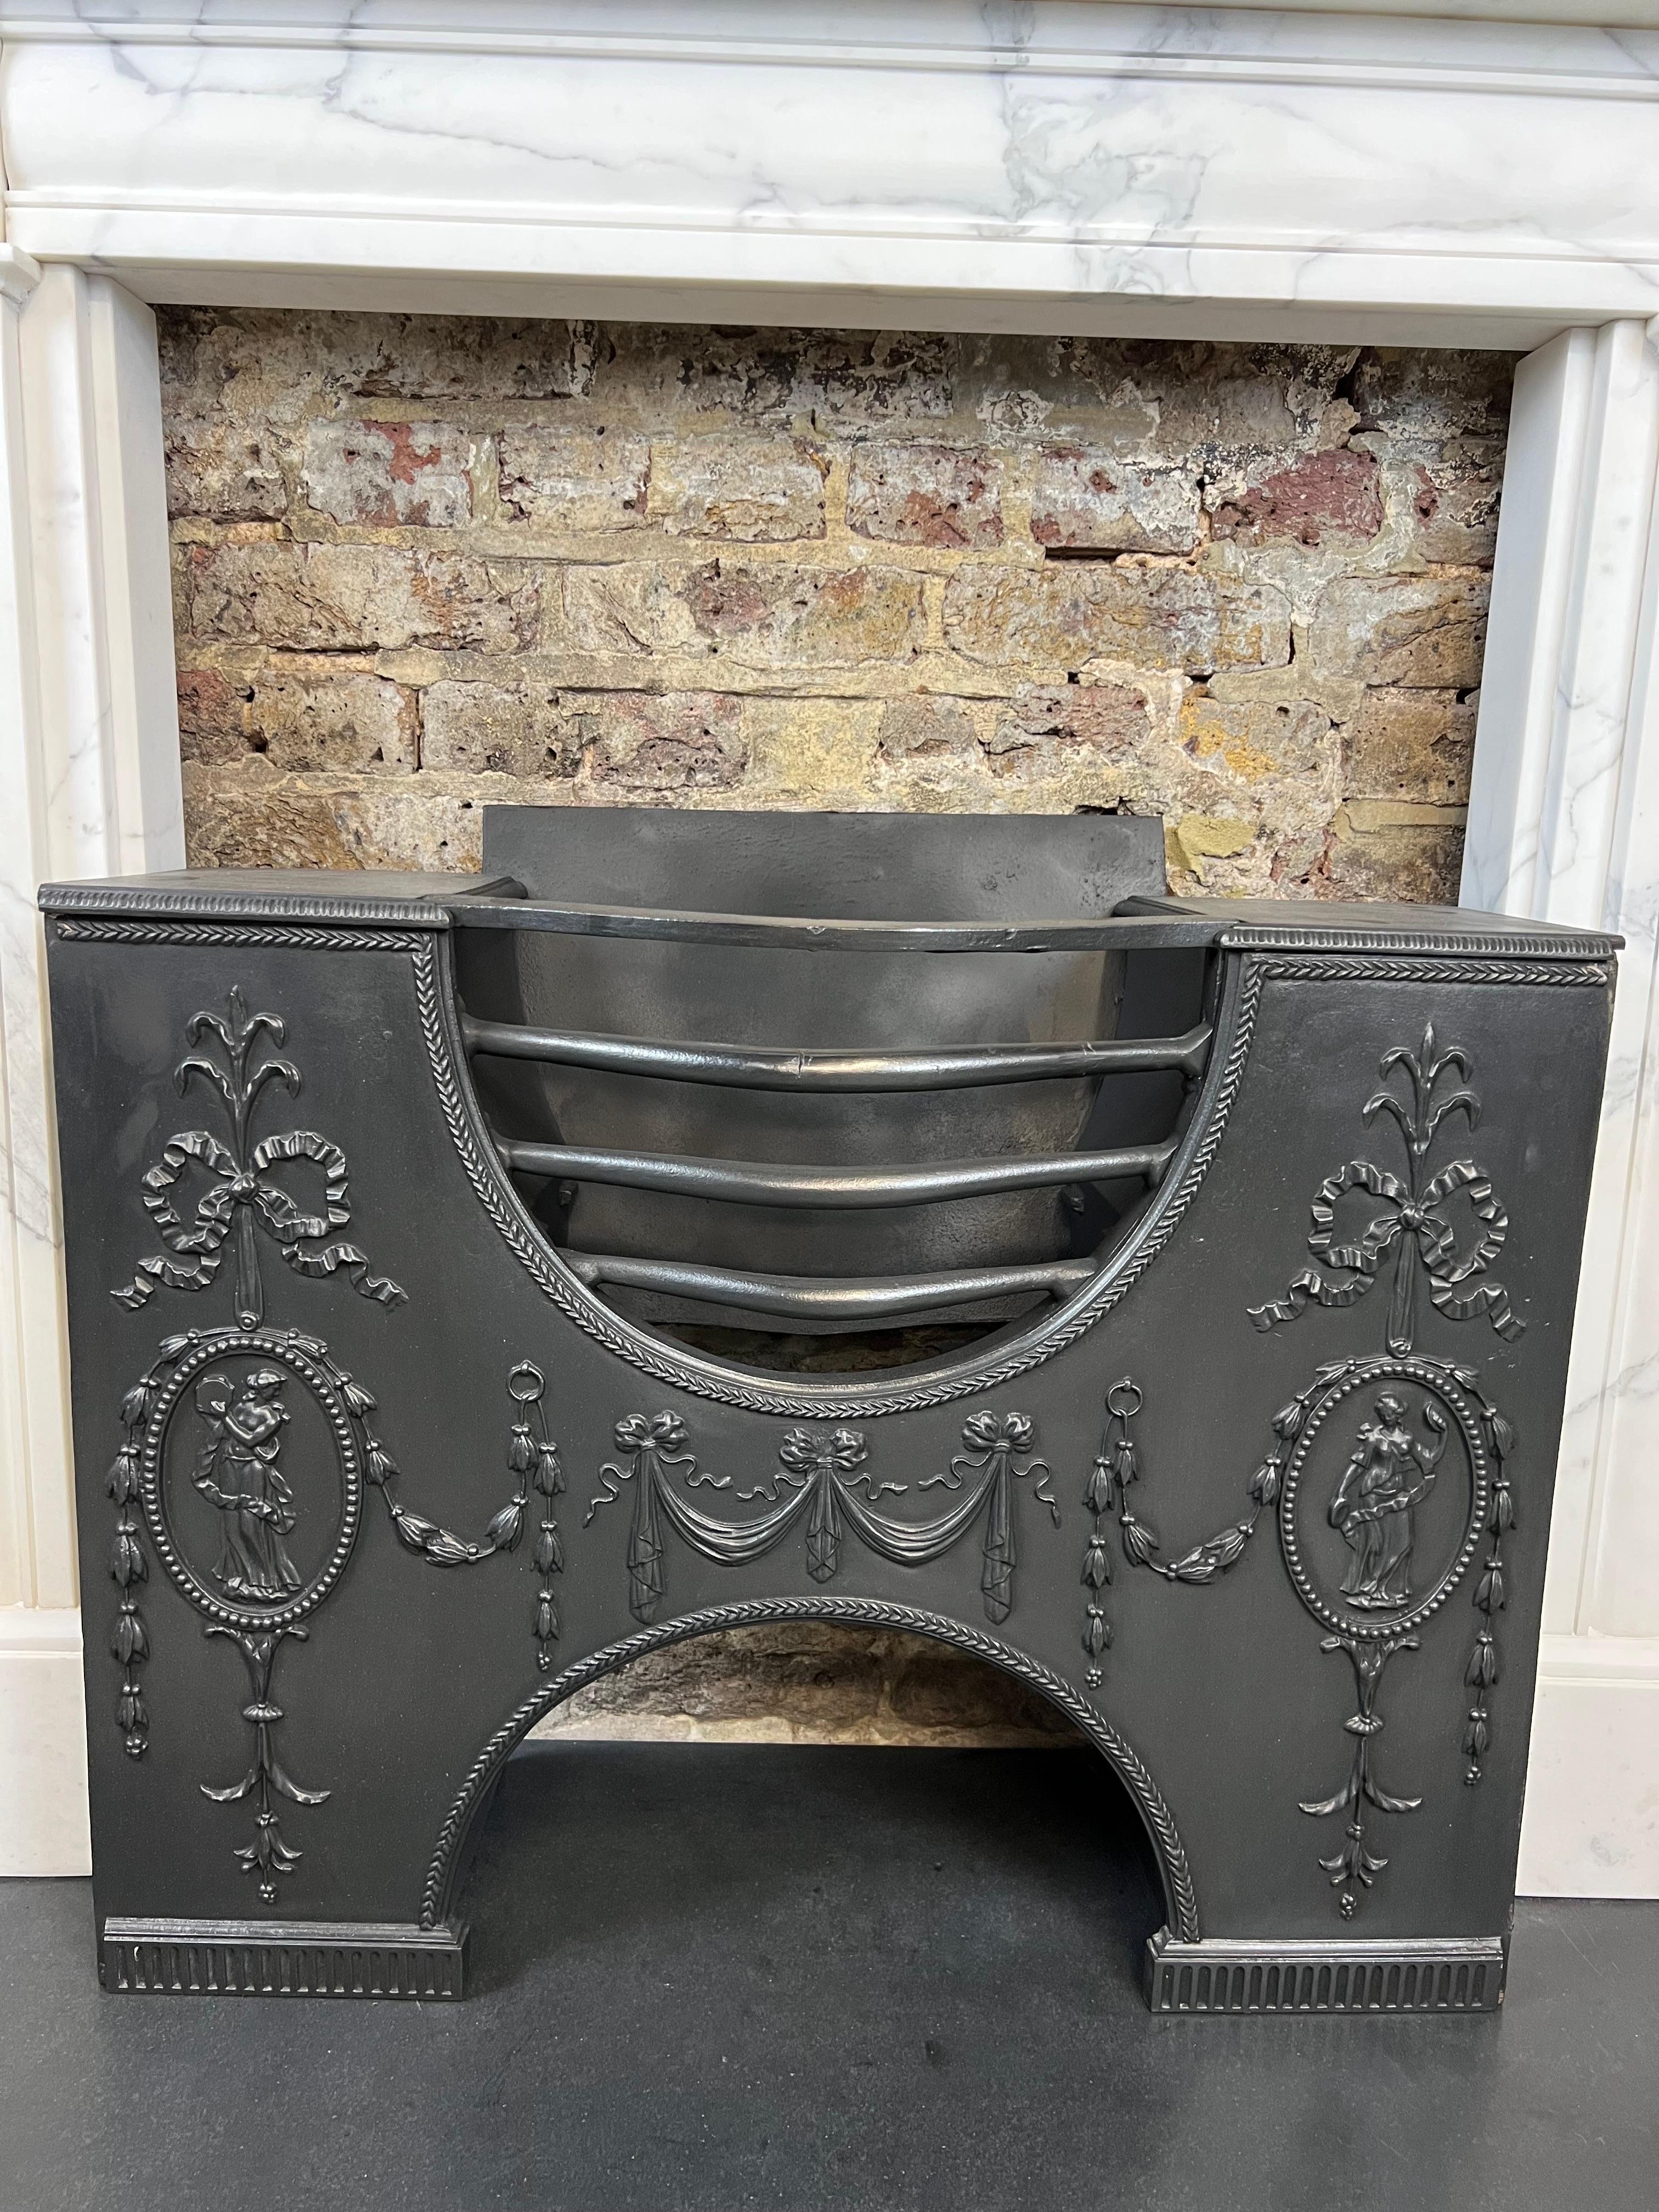 19th Century Georgian Cast Iron Hob Grate Fireplace.
Fine Example Of An Early to Mid 19th Century Cast Iron Fireplace Interior. 
Also Known As A Half Hob Grate Fitted Within A Mantlepiece and Or Just A Cavity. 
Typical Decorative Cast-iron Features